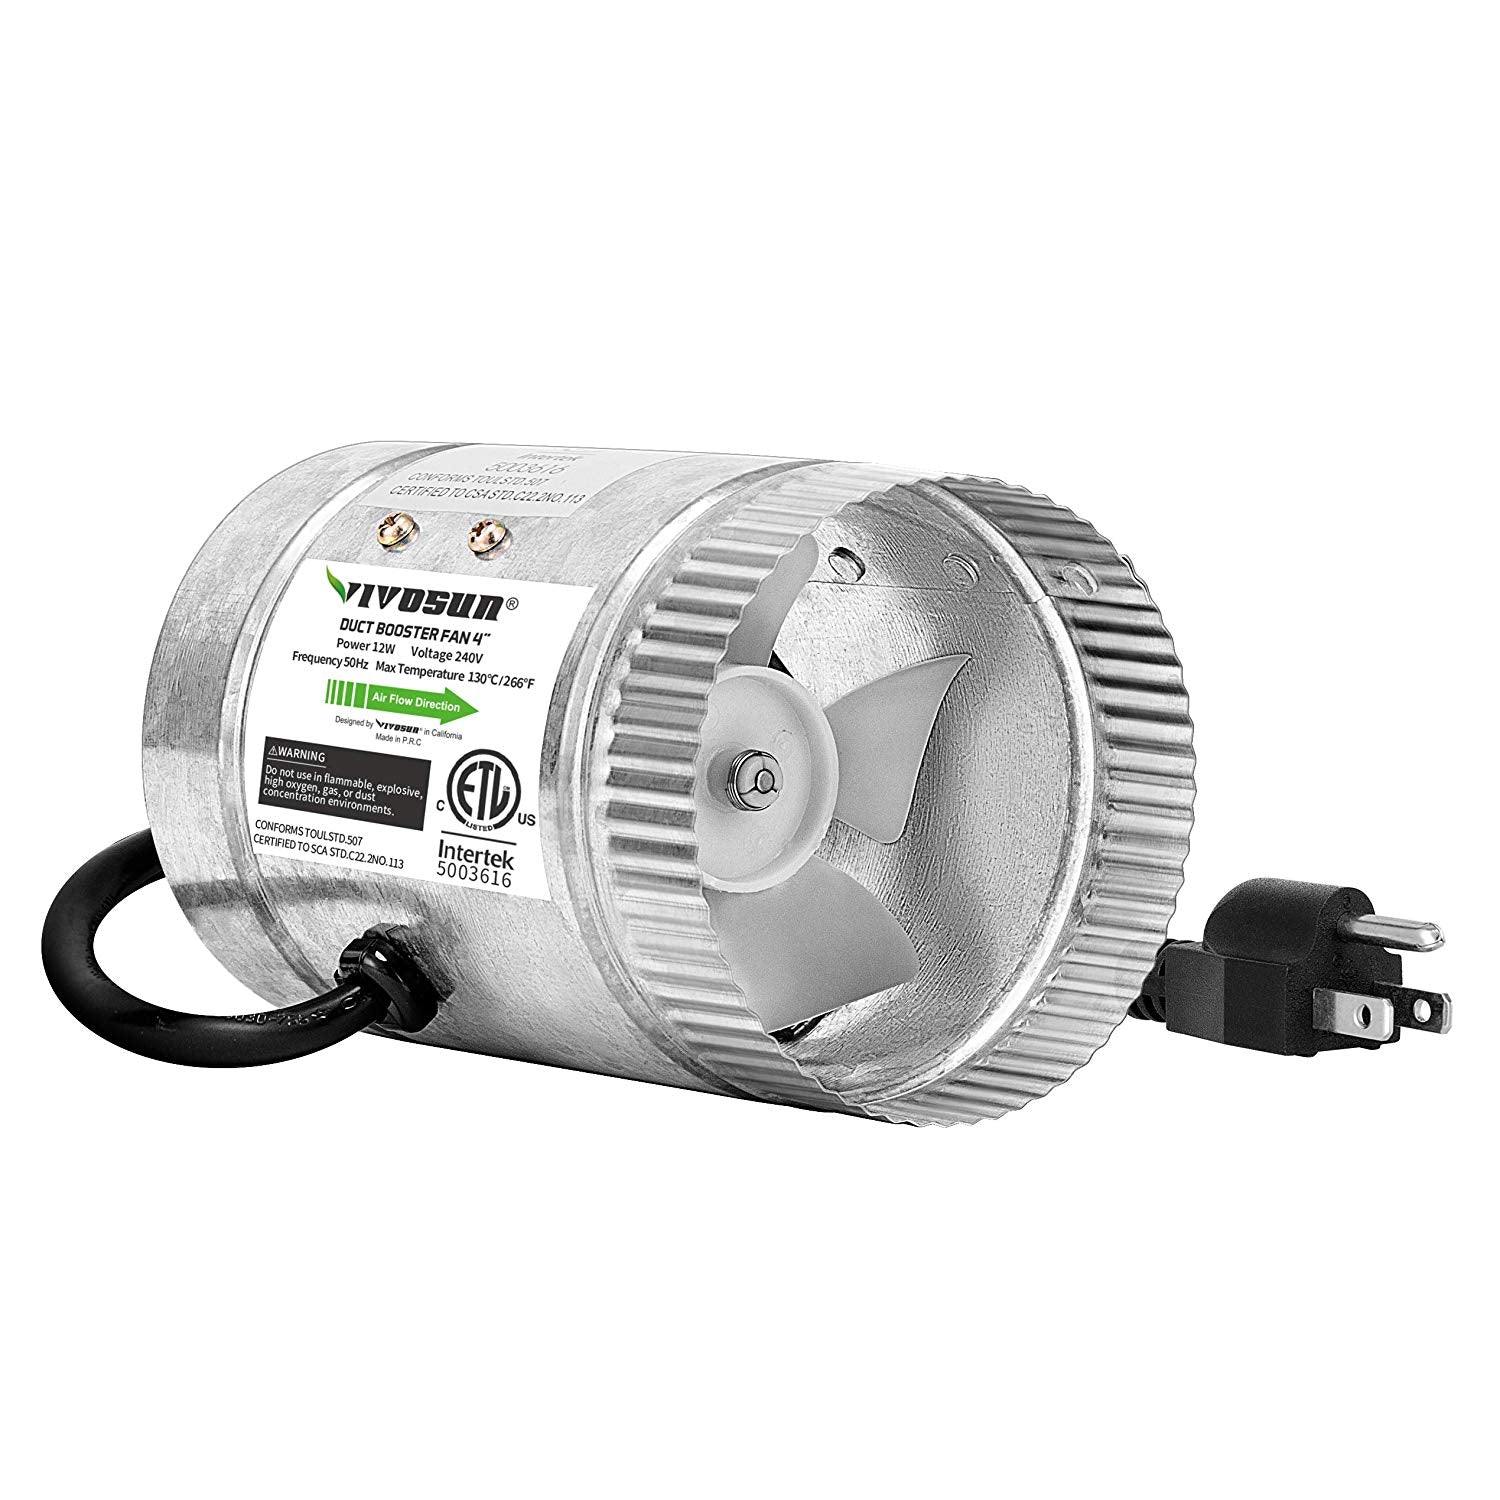 VIVOSUN 4 inch Inline Duct Booster Fan 100 CFM, HVAC Exhaust Intake Fan, Low Noise & Extra Long 5.5' Grounded Power Cord